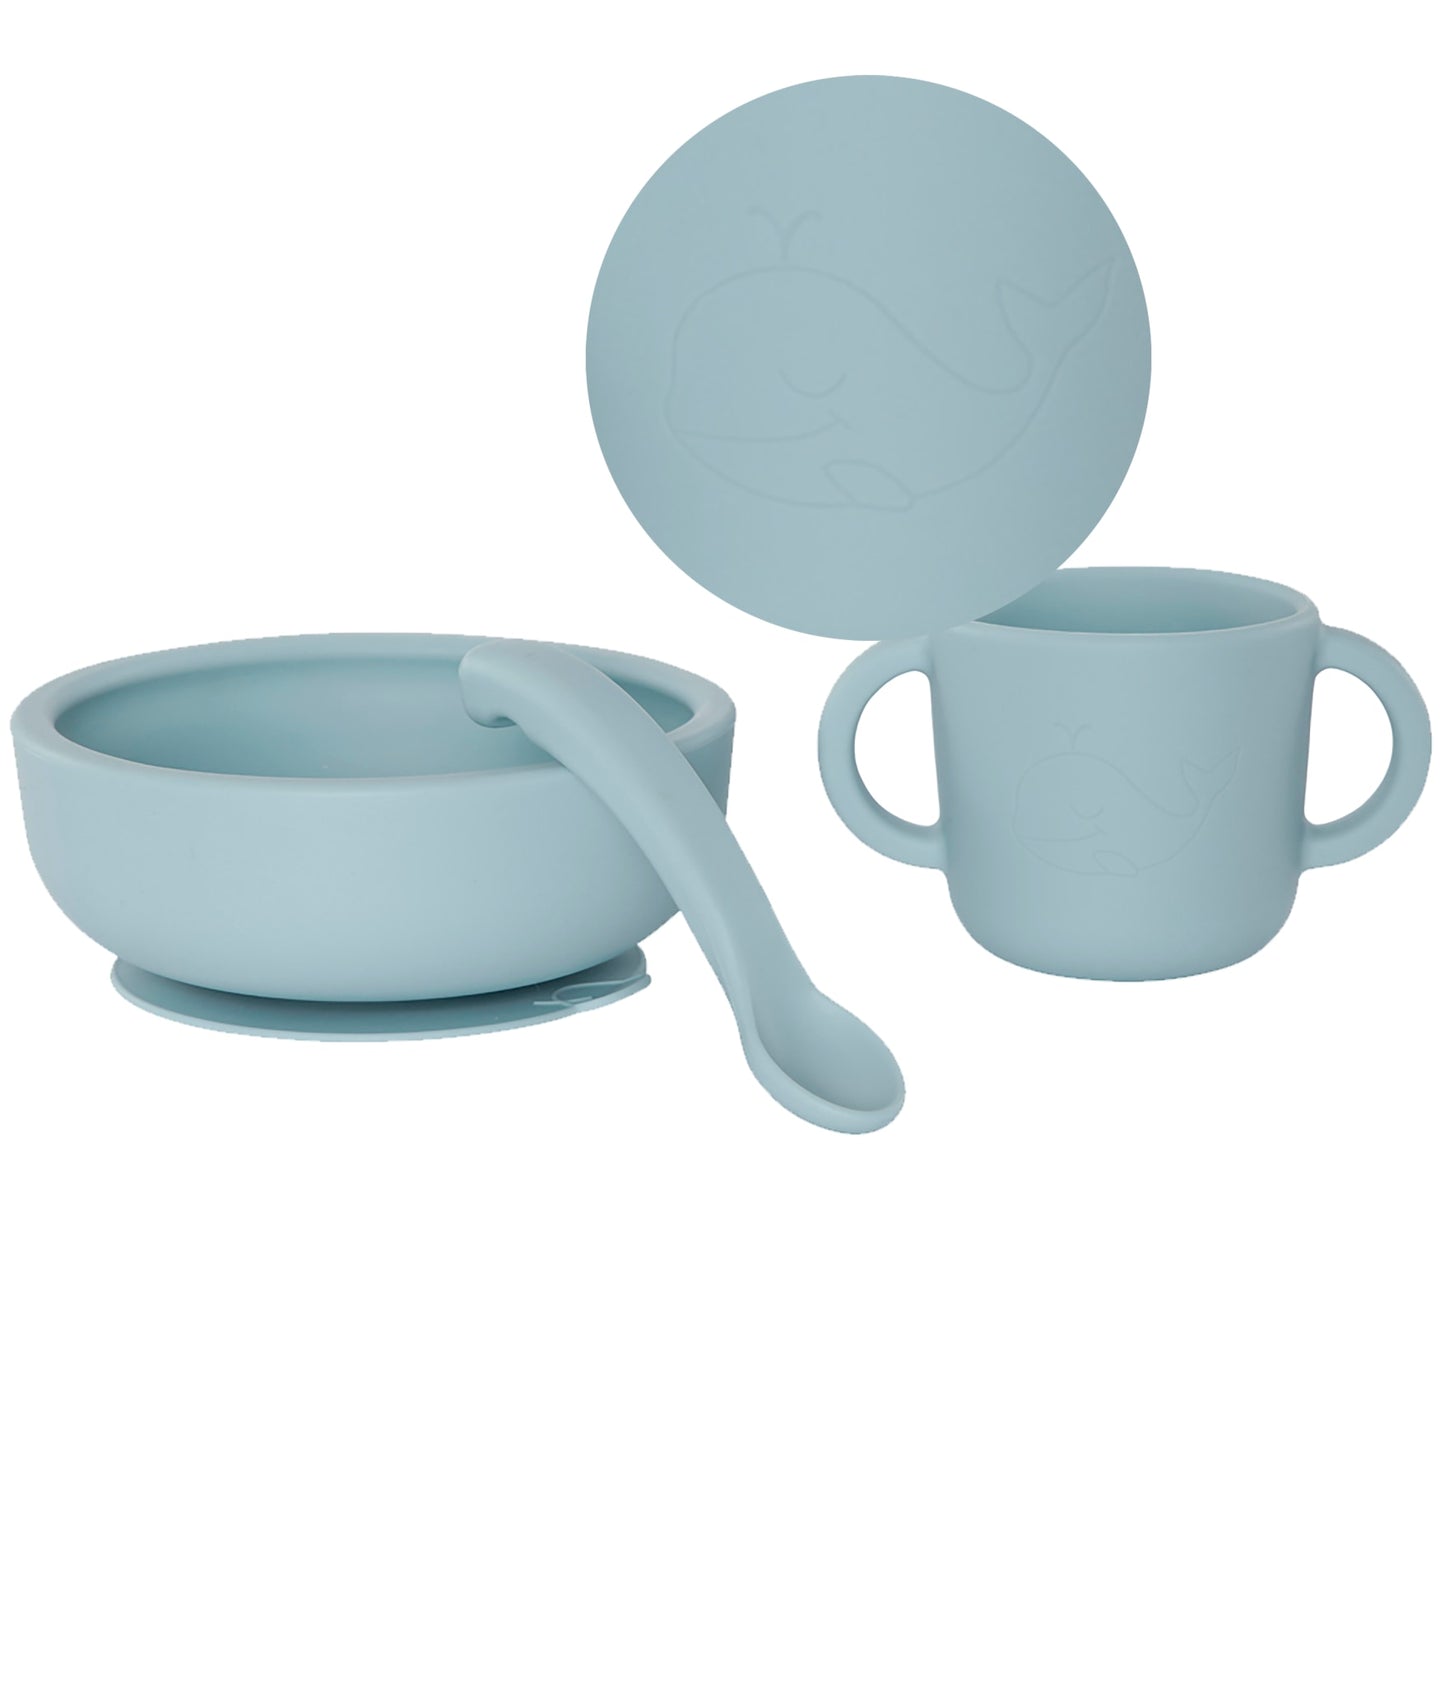 Baby Dinner set - bowl w/cup and spoon